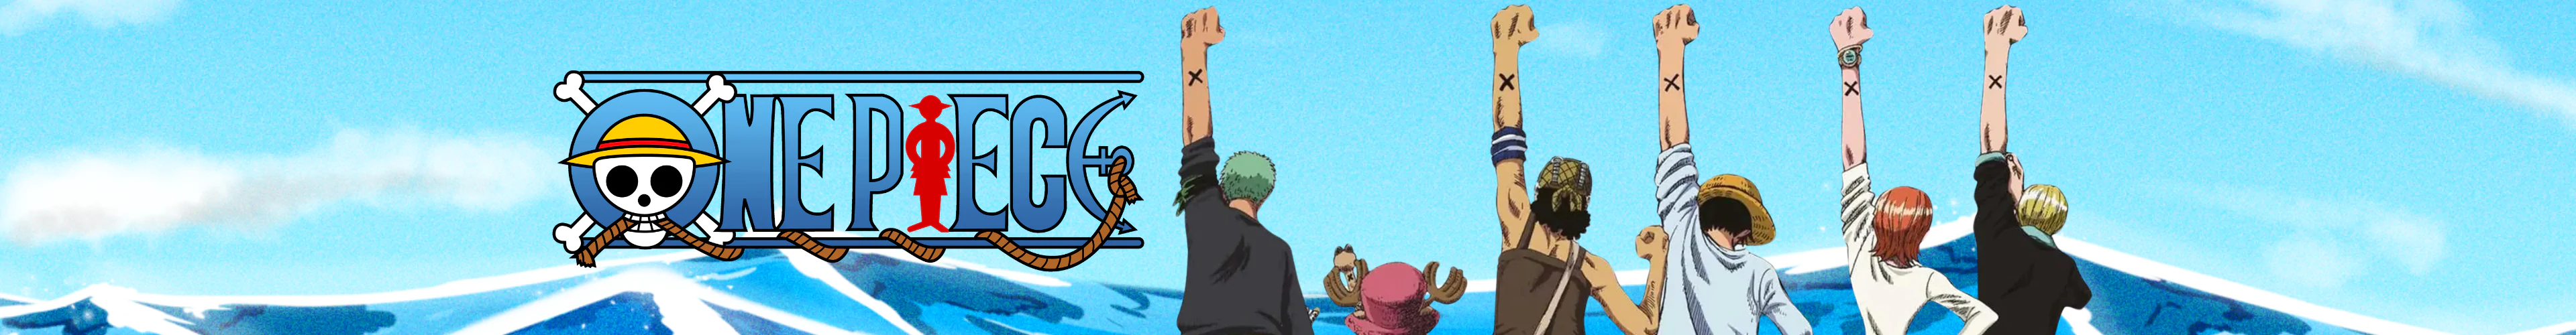 One Piece pencil cases banner